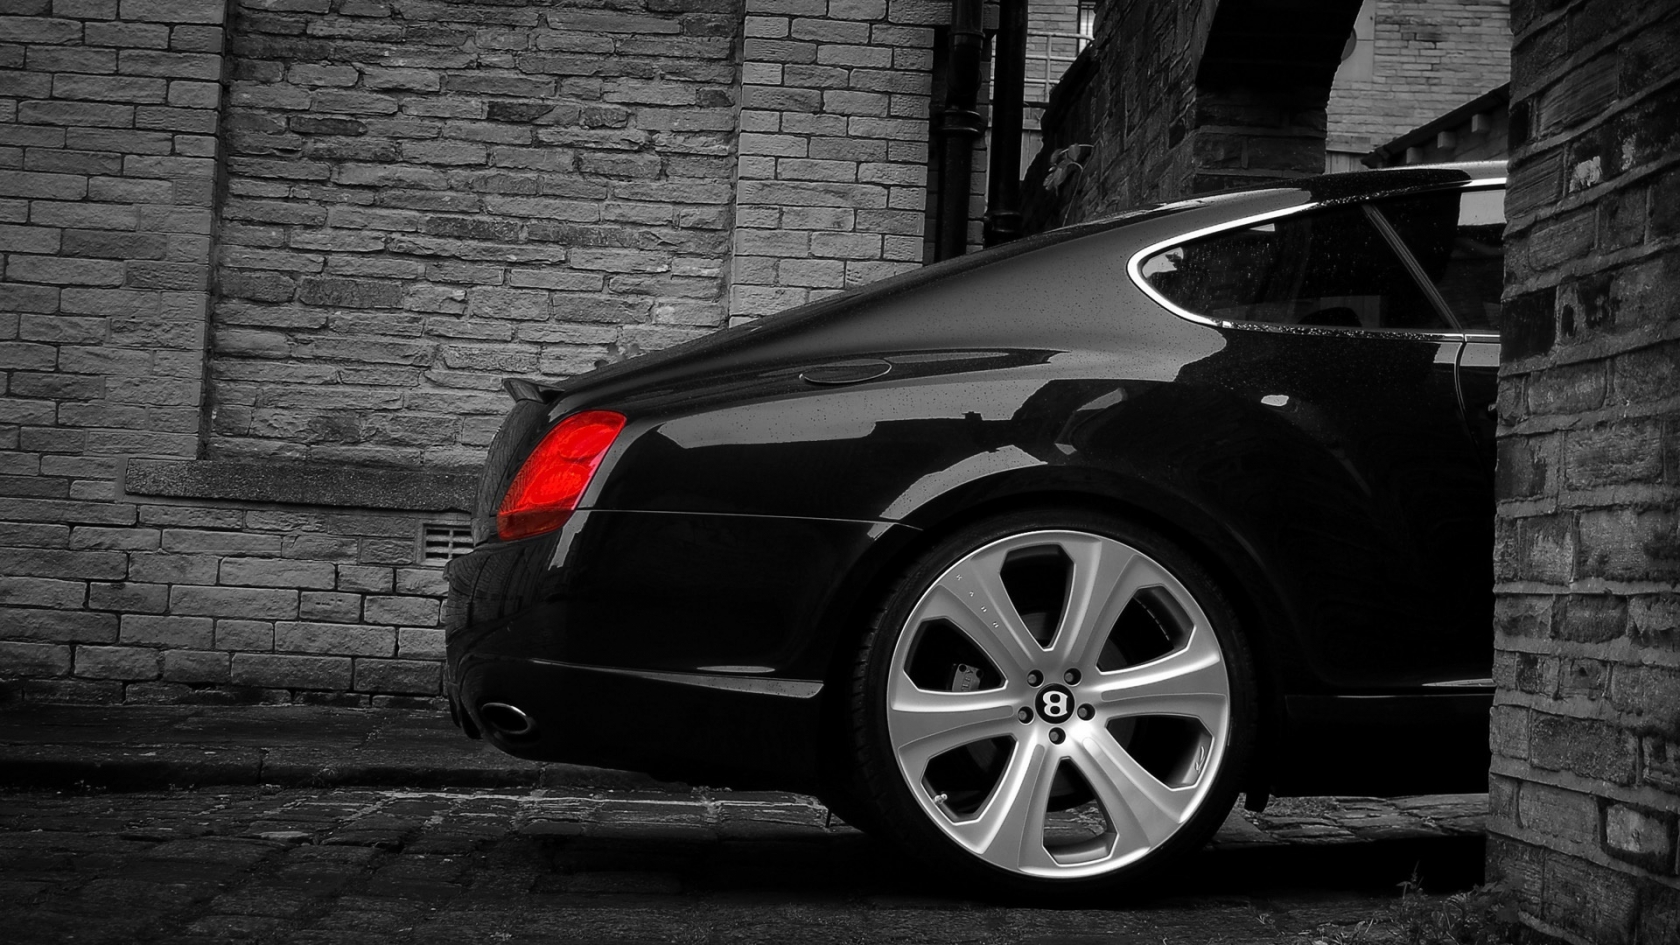 Bentley Continental GT S Project Kahn 2008 Rear for 1680 x 945 HDTV resolution